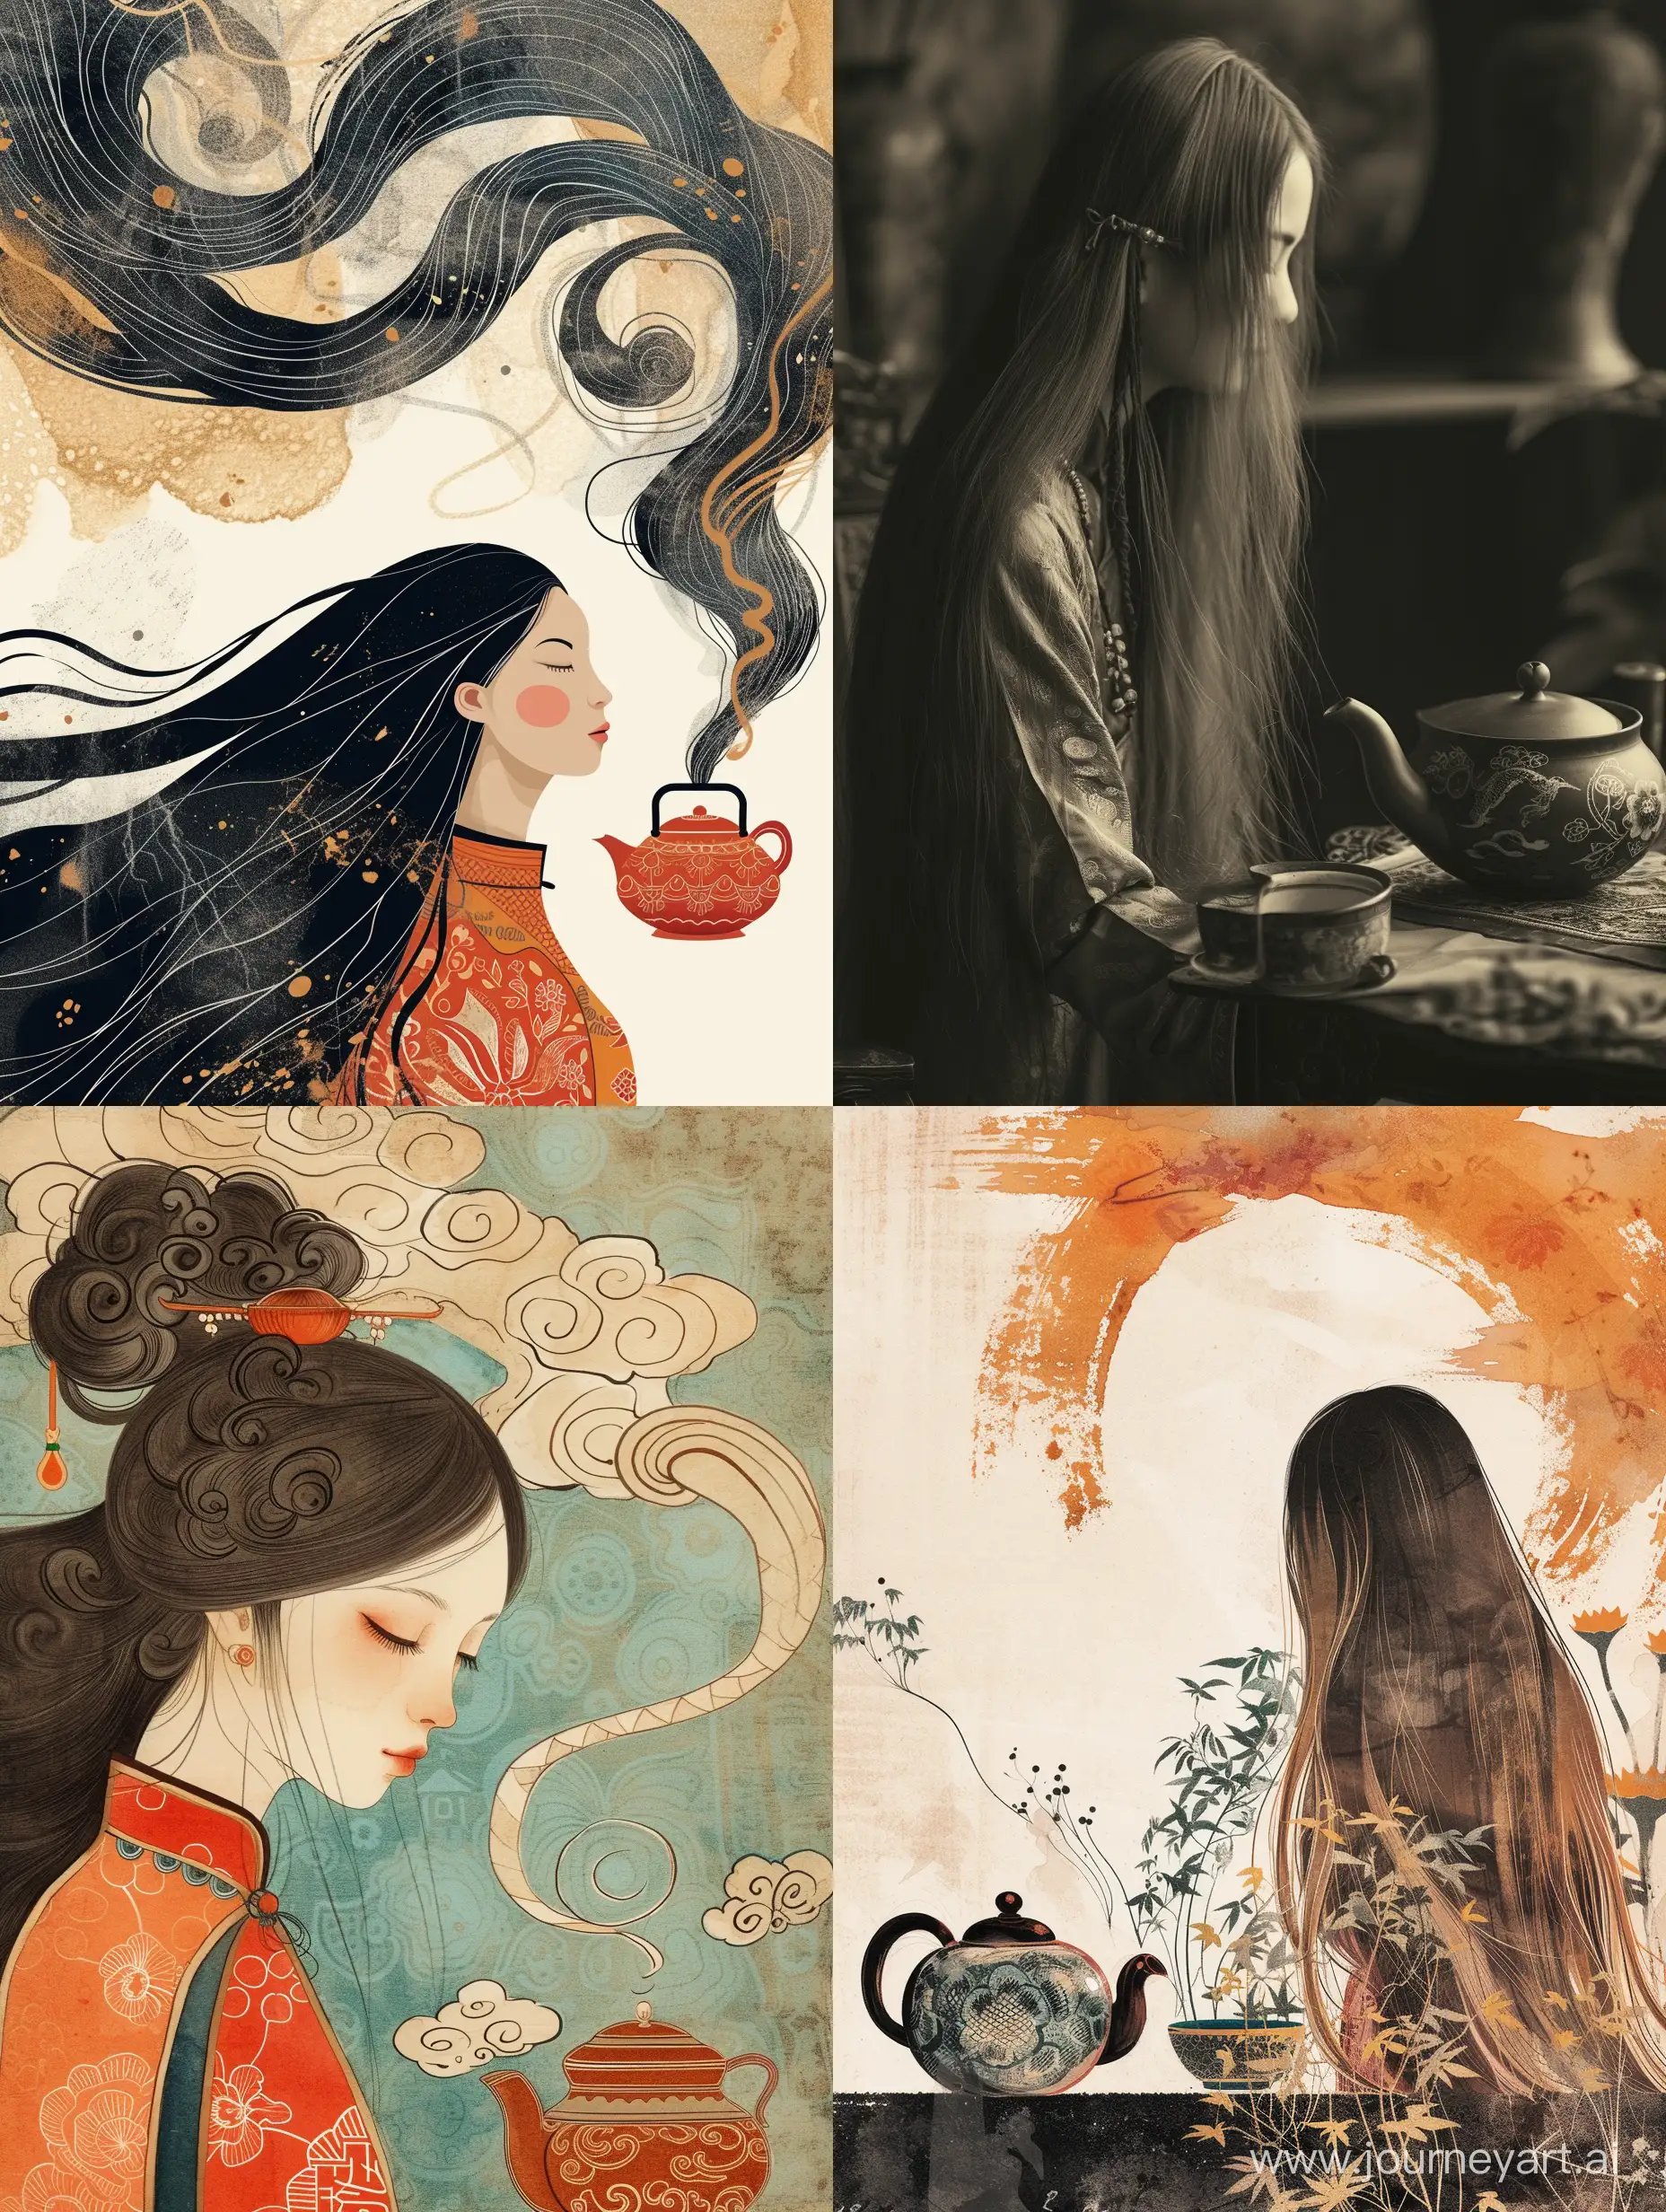 Lunar tea ceremony, Chinese teapot, woman with long hair